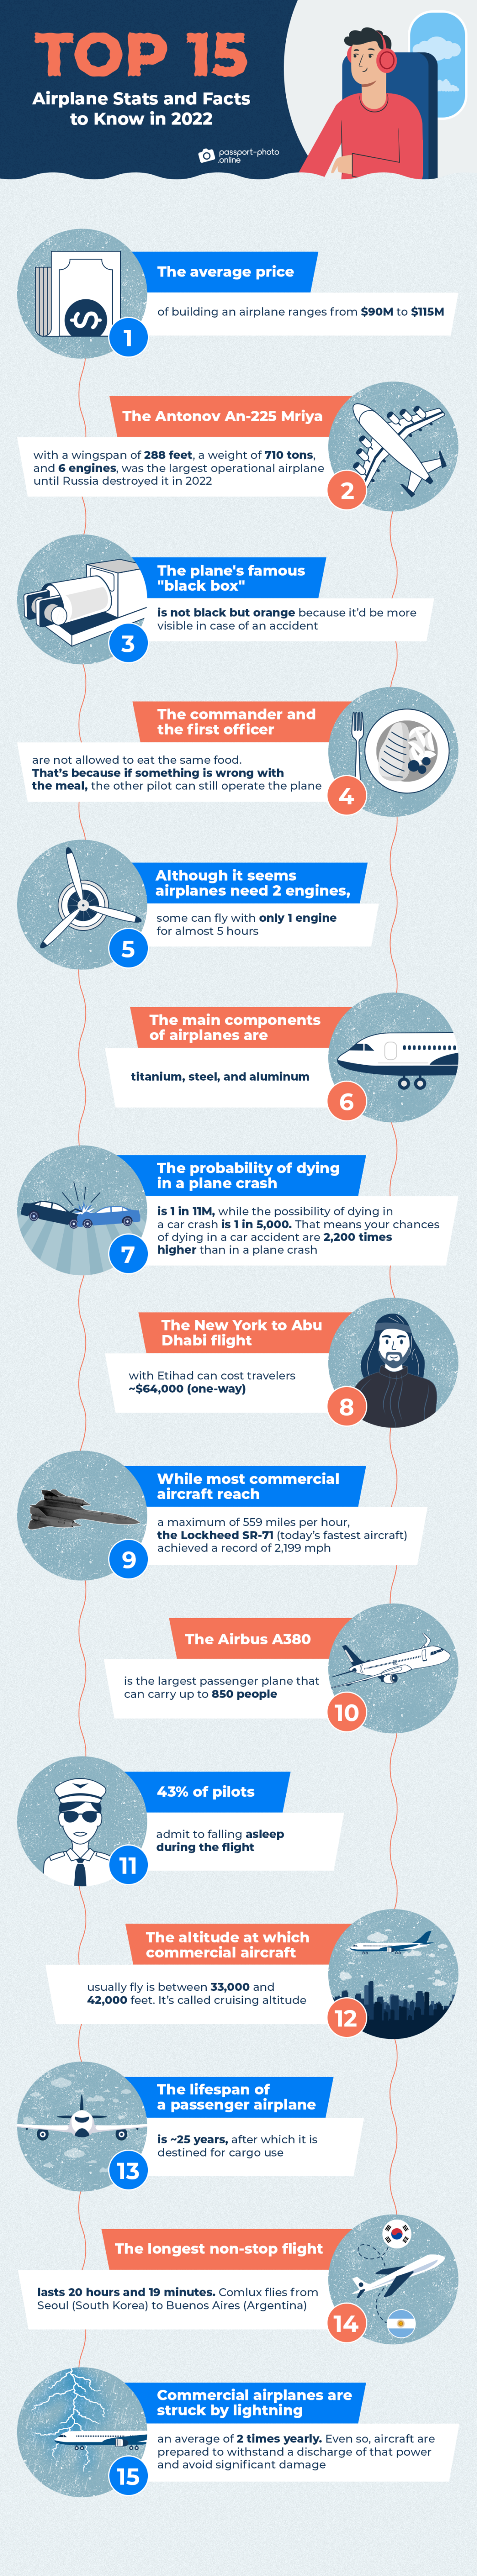 top 15 surprising airplane stats and facts